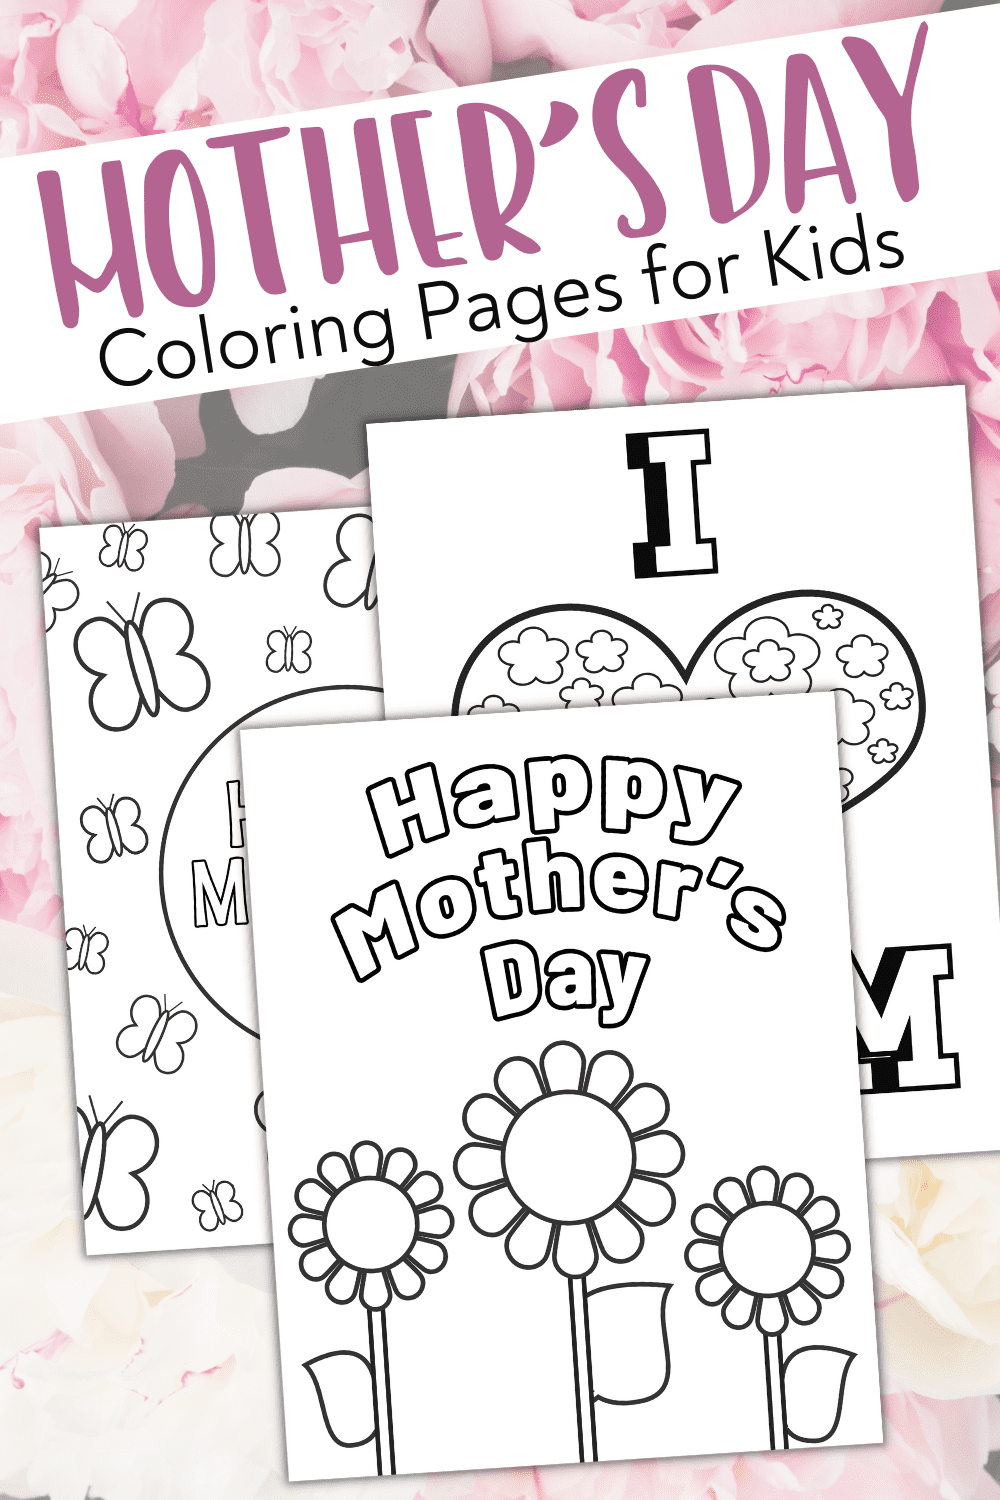 Mothers Day Coloring Pages